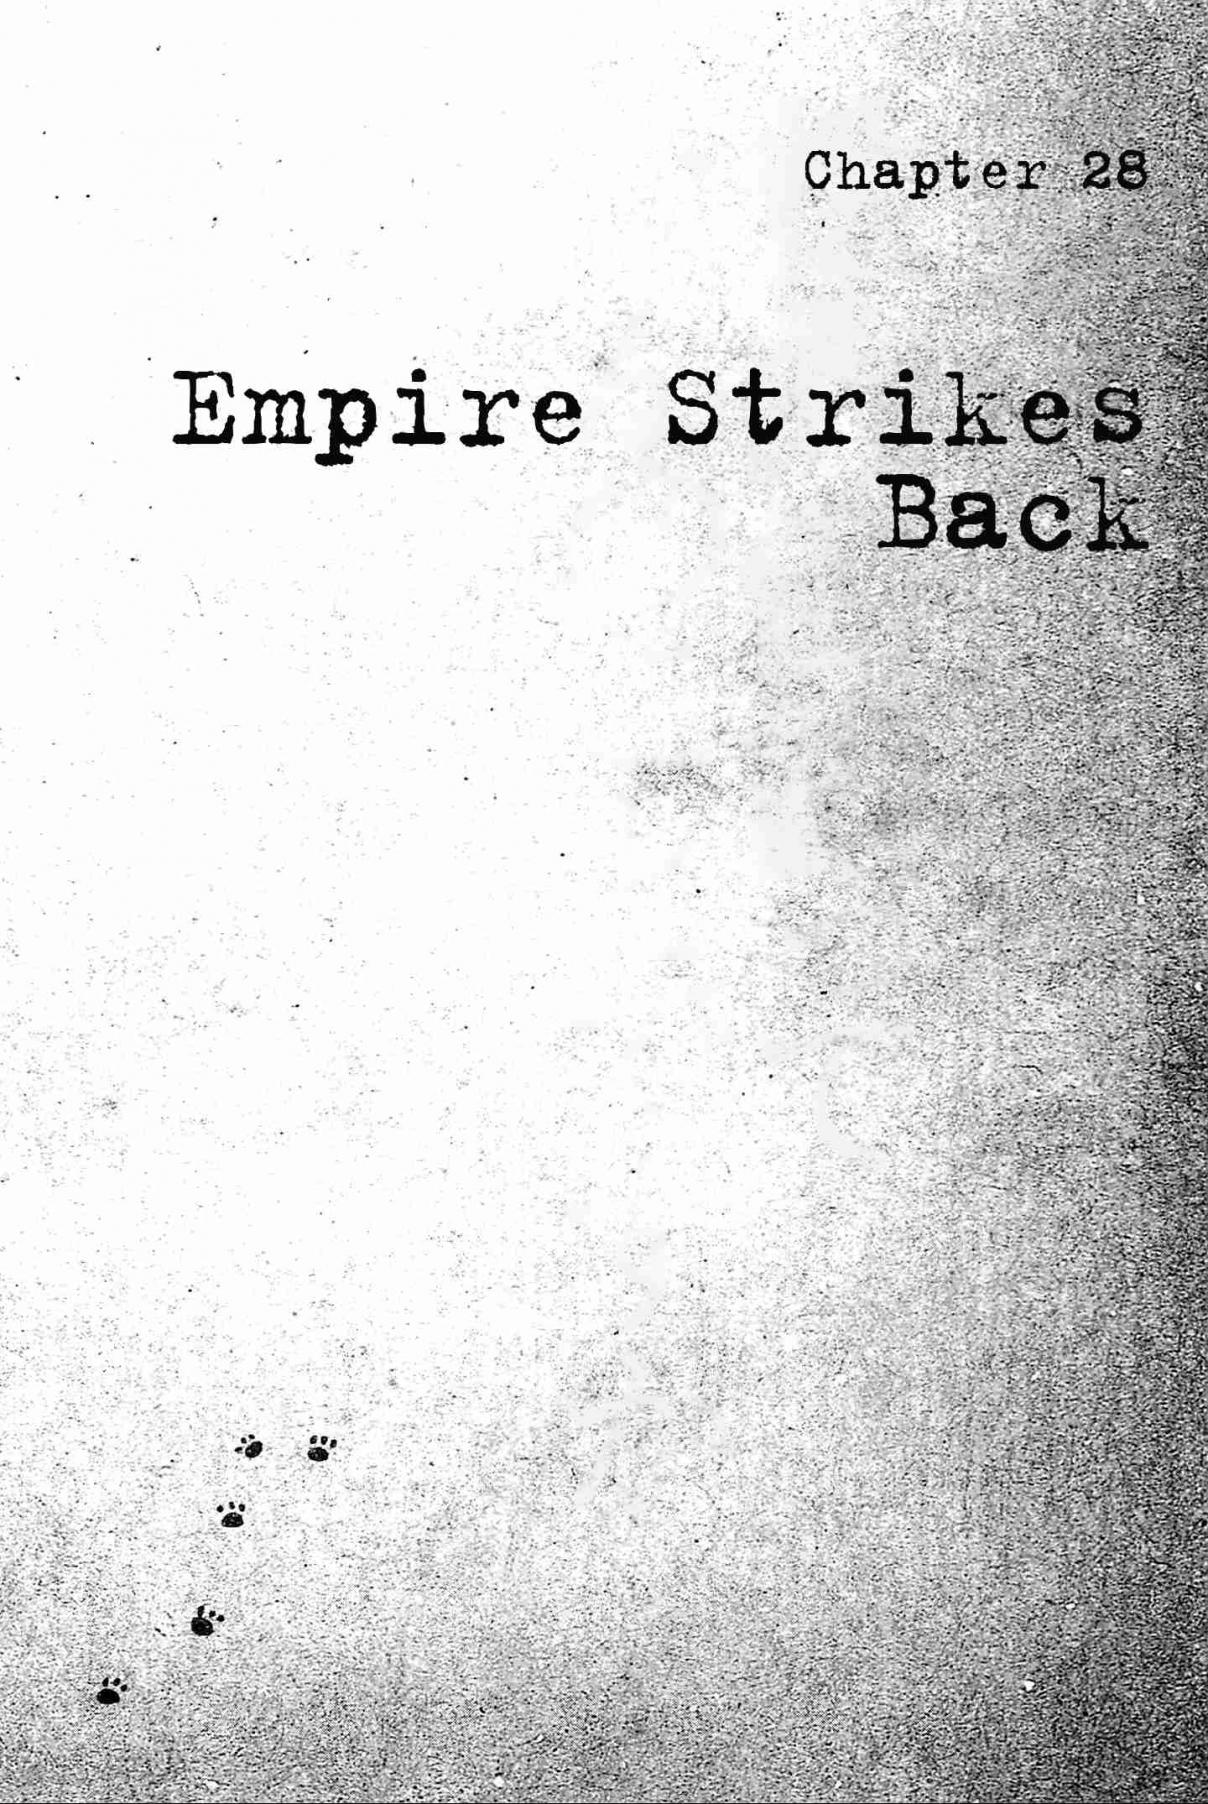 Guns and Stamps Vol. 4 Ch. 28 Empire Strikes Back